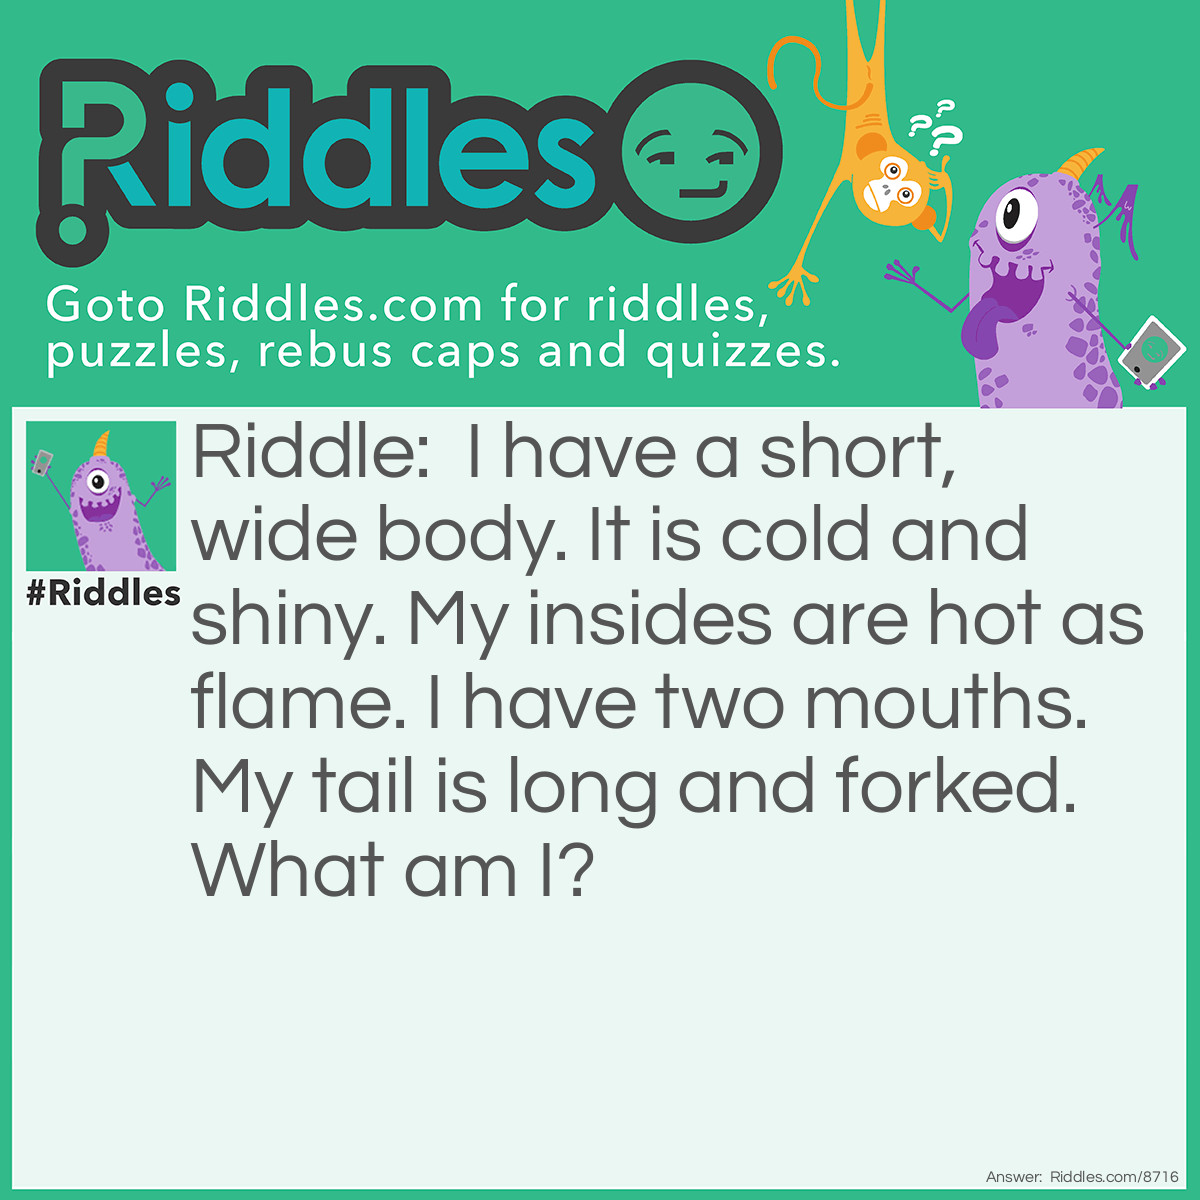 Riddle: I have a short, wide body. It is cold and shiny. My insides are hot as flame. I have two mouths. My tail is long and forked. What am I? Answer: A Toaster.